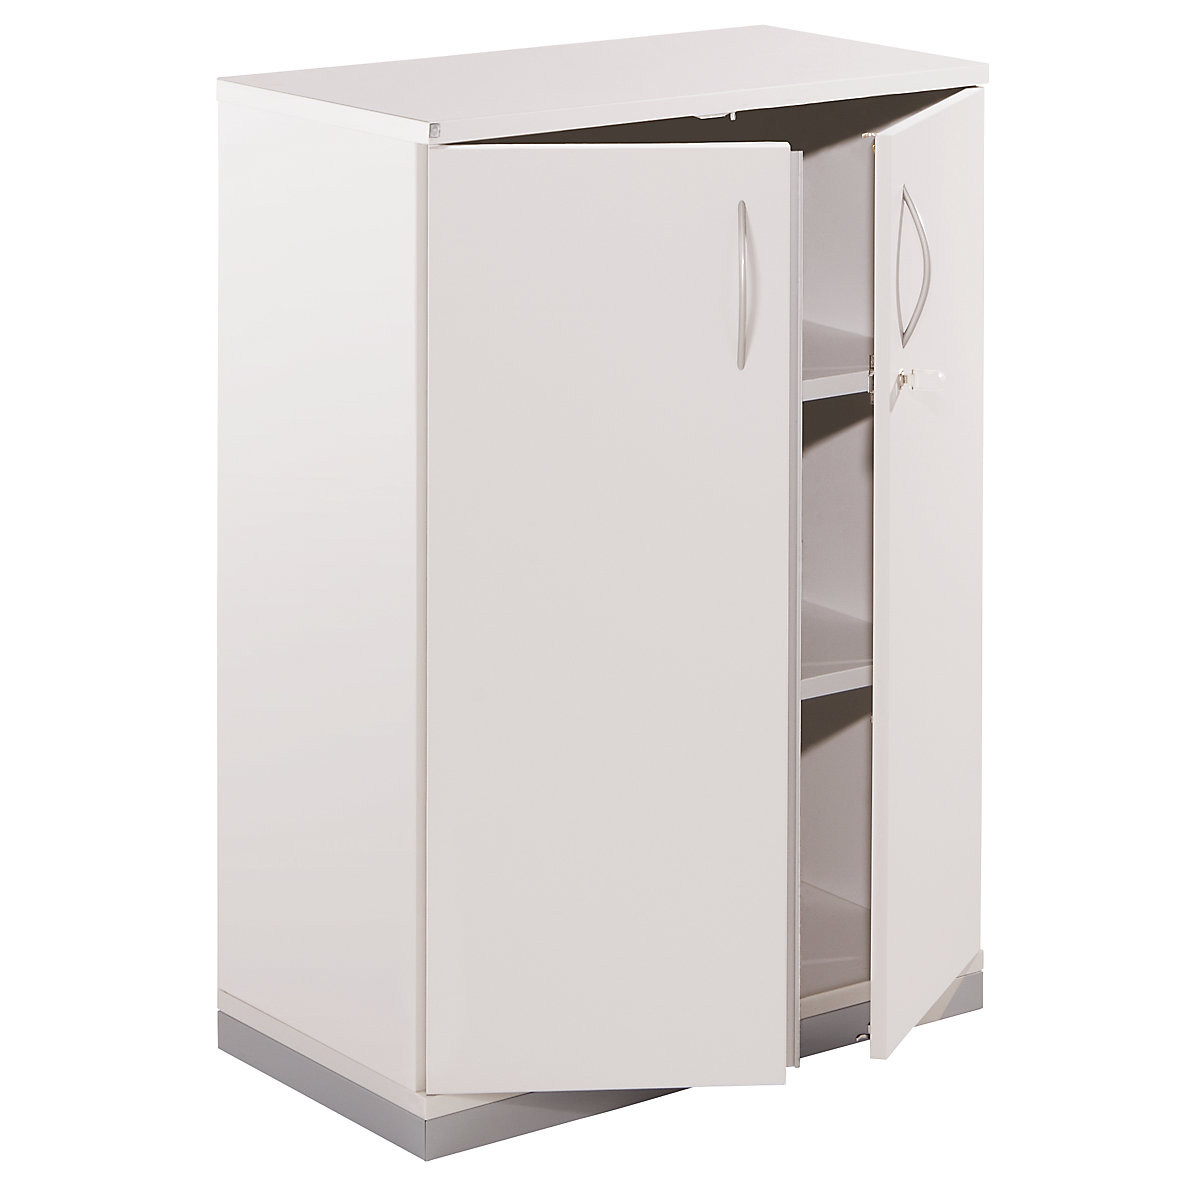 Double door cupboard THEA, 2 shelves, 3 file heights, antique white-4